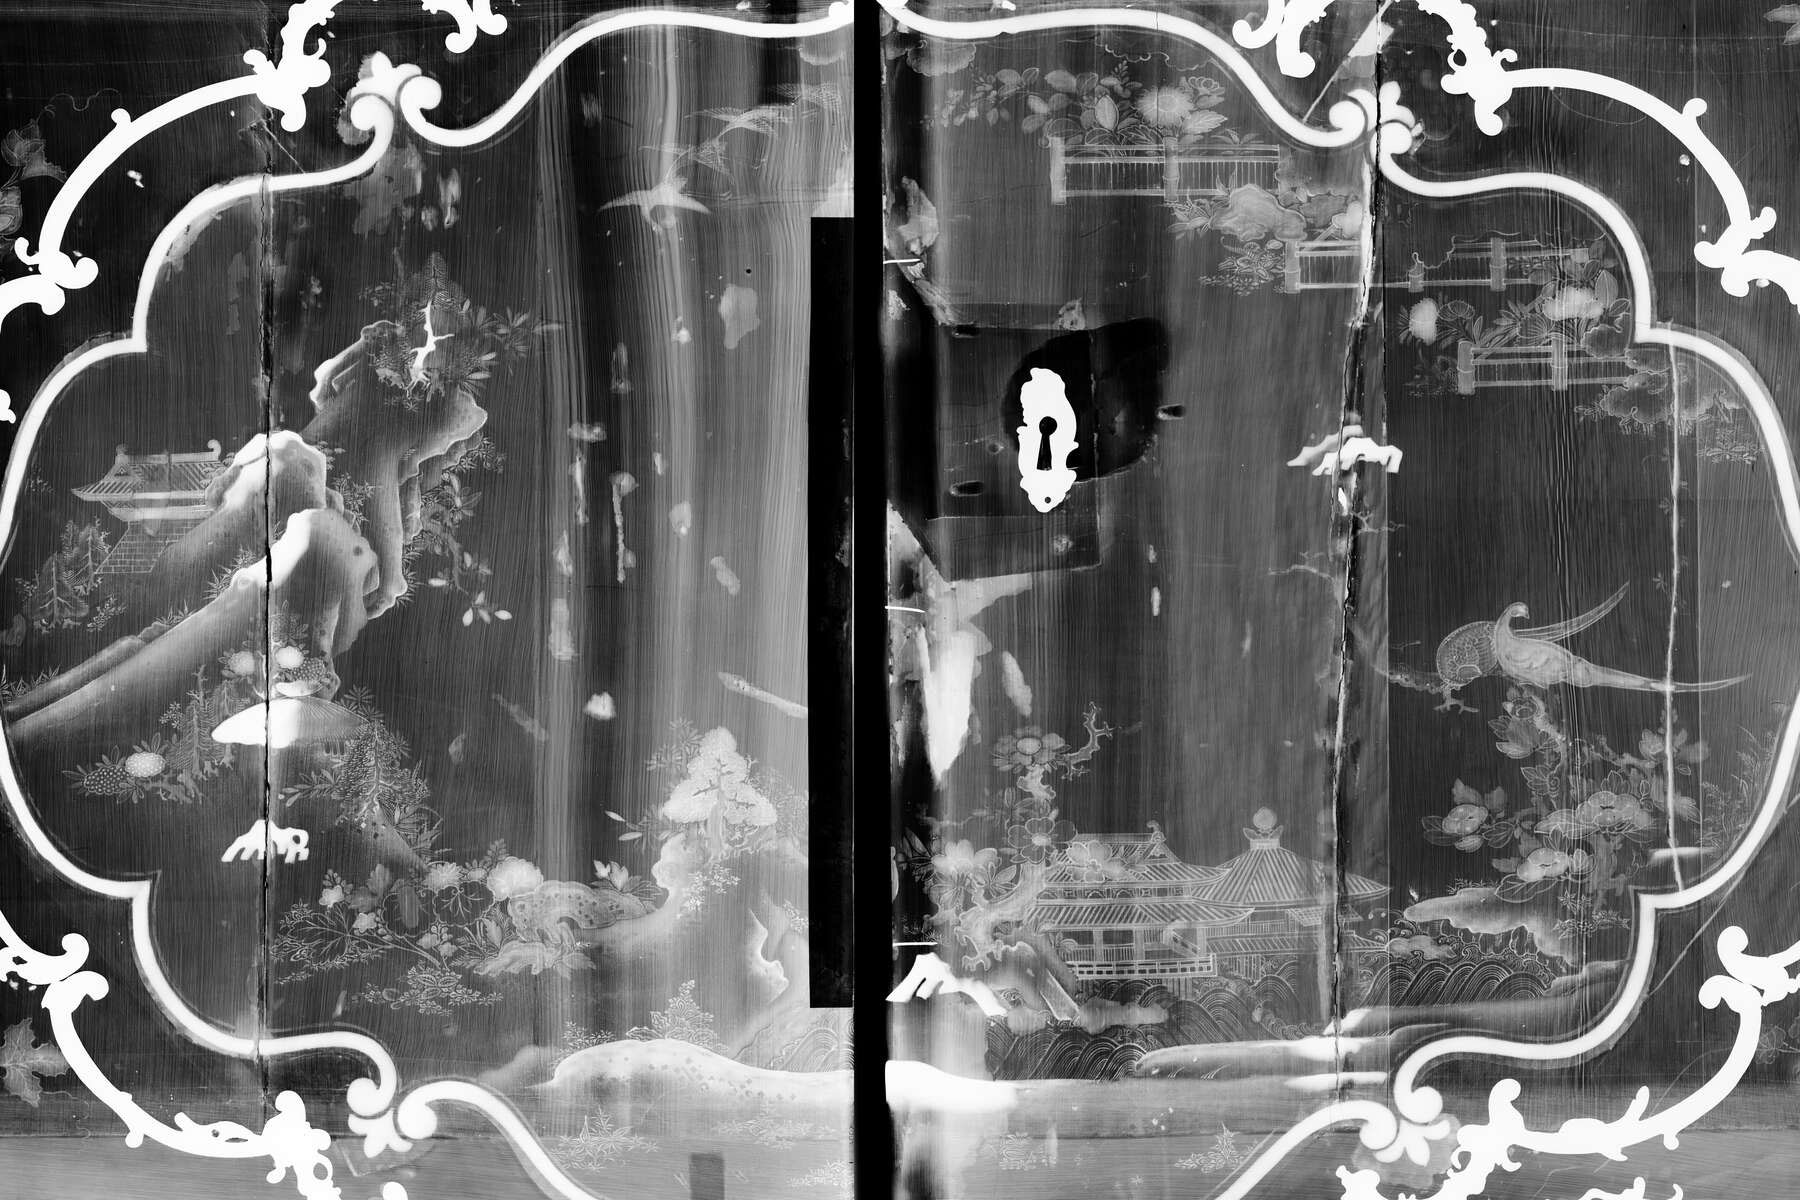 composite black and white x-ray of the front doors, showing the gilt bronze mounts, locking mechanism, and lacquer landscape scenes in bright white and the black base in shades of gray and black